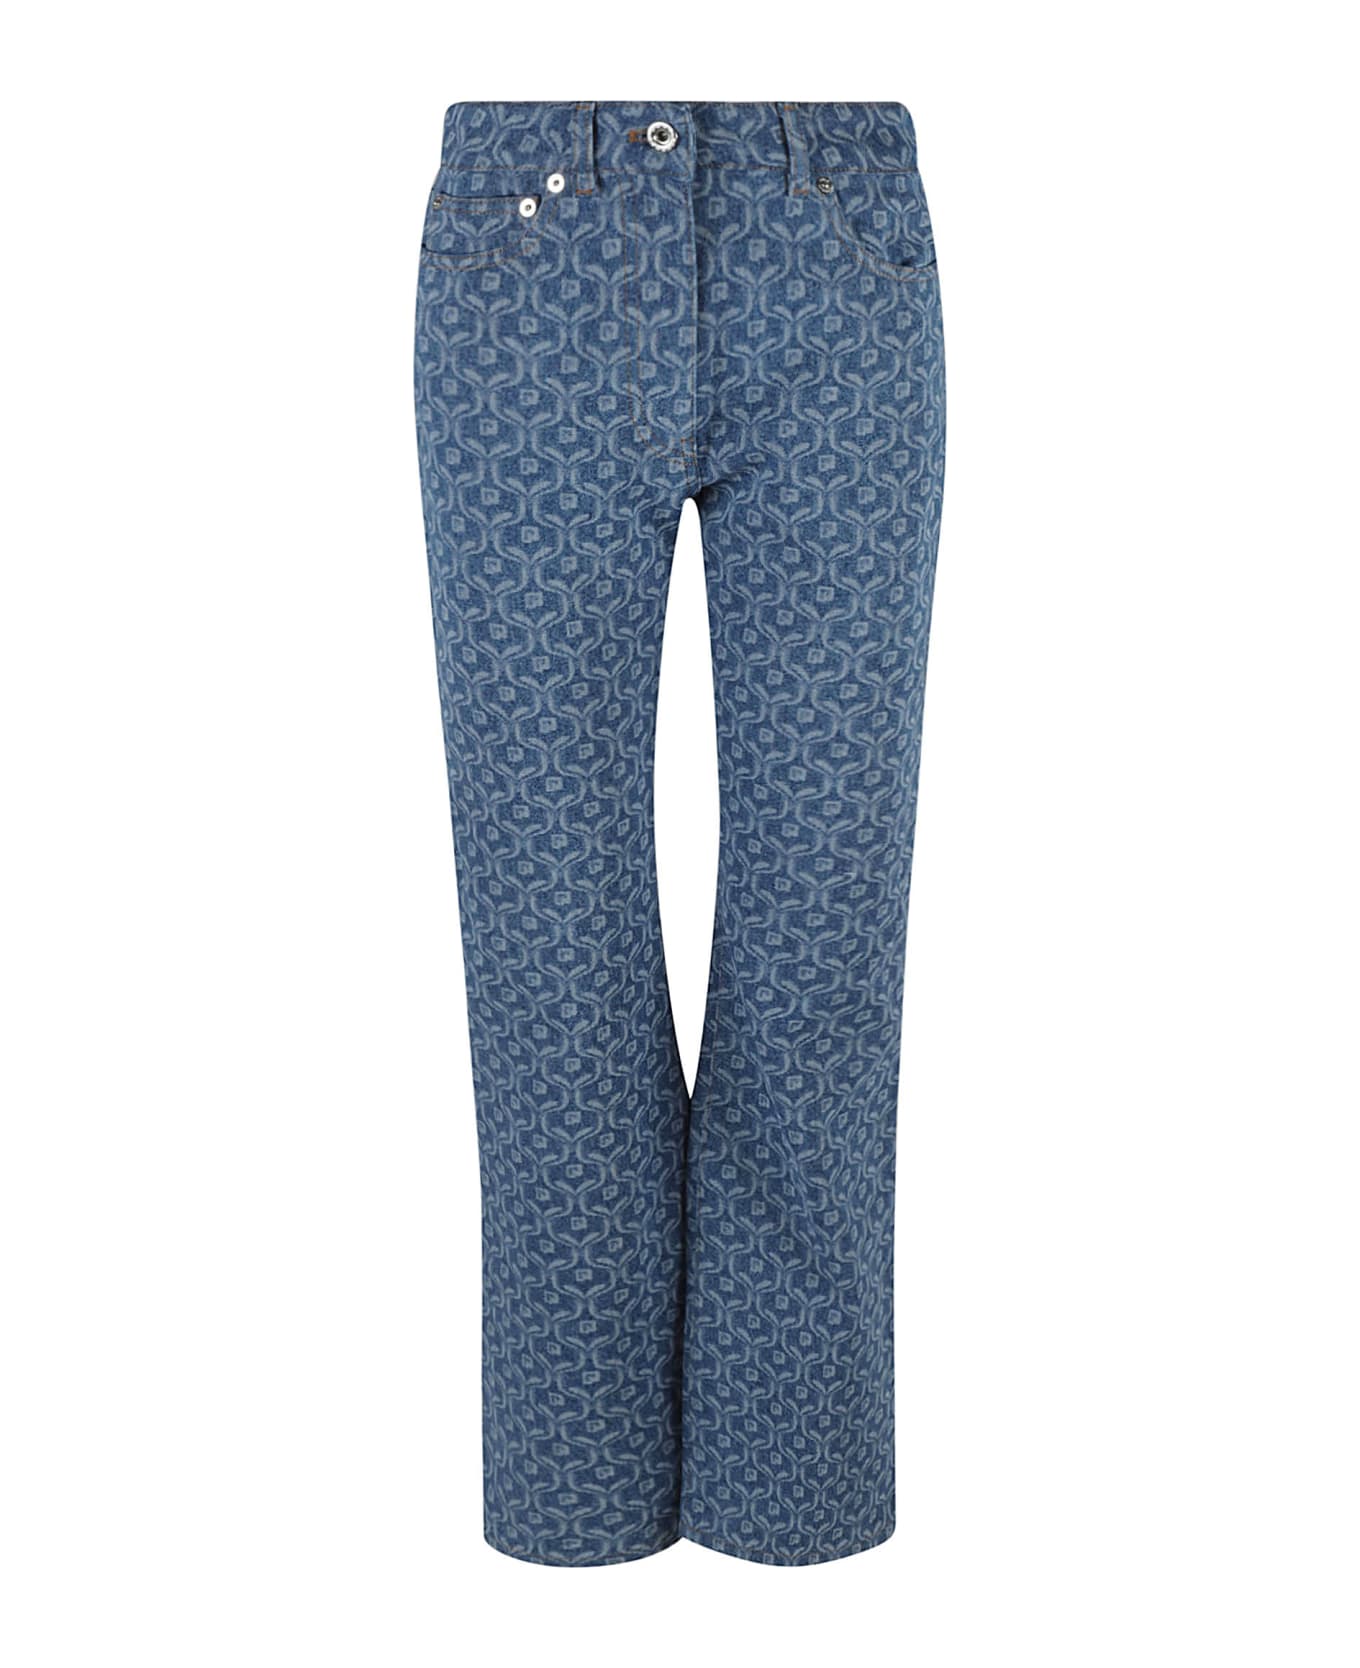 Paco Rabanne Printed Buttoned Jeans - M412 デニム